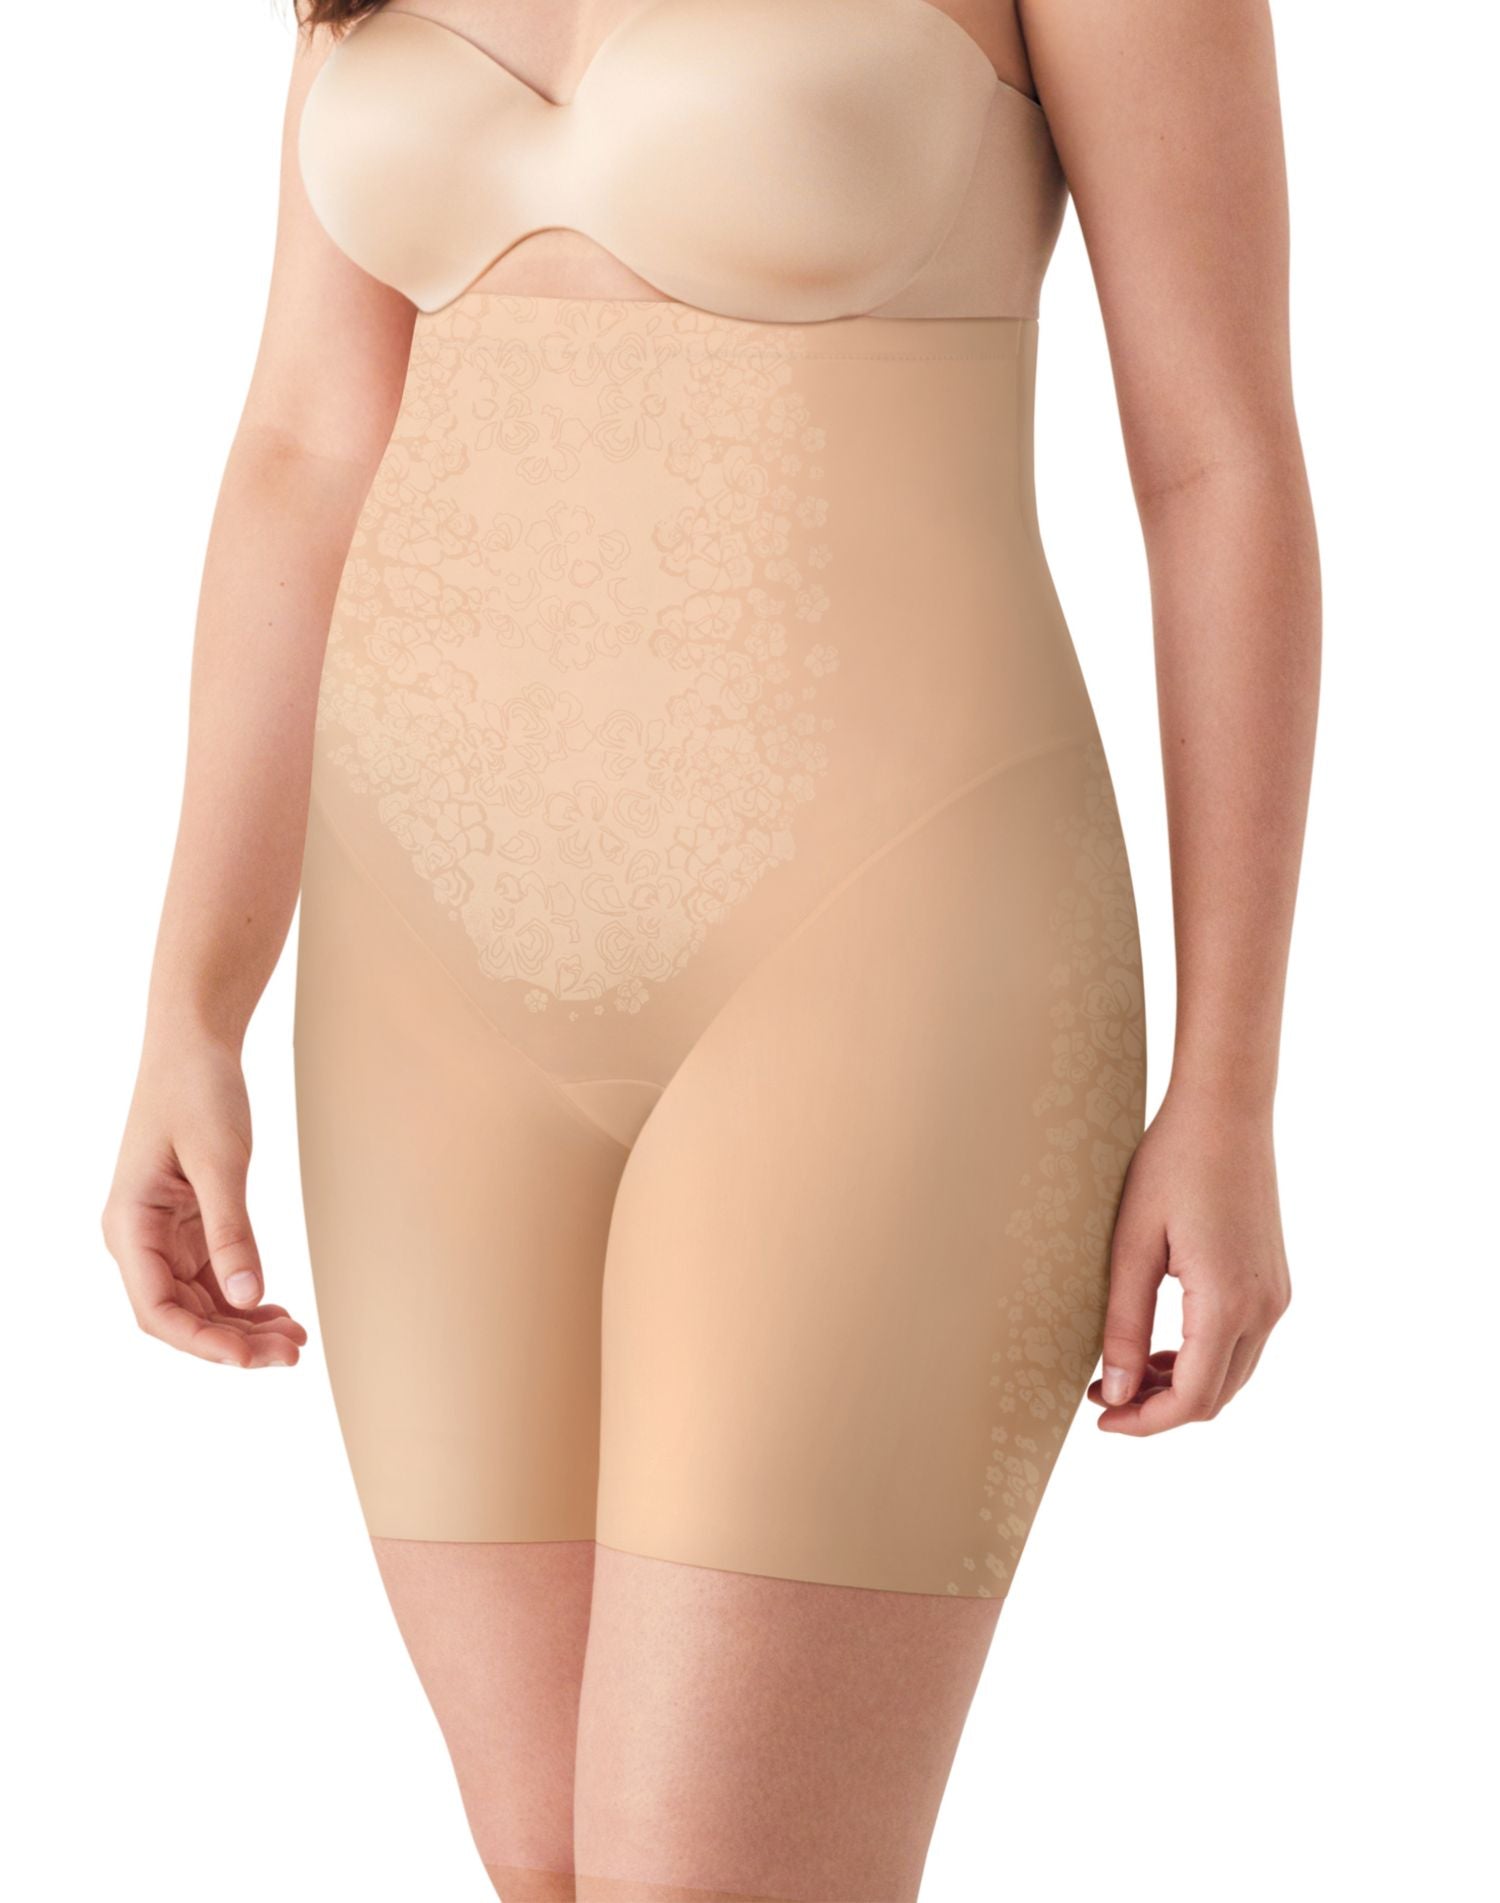 Size Large Maidenform Flexees Smoothing Thigh Slimmer Cool Comfort